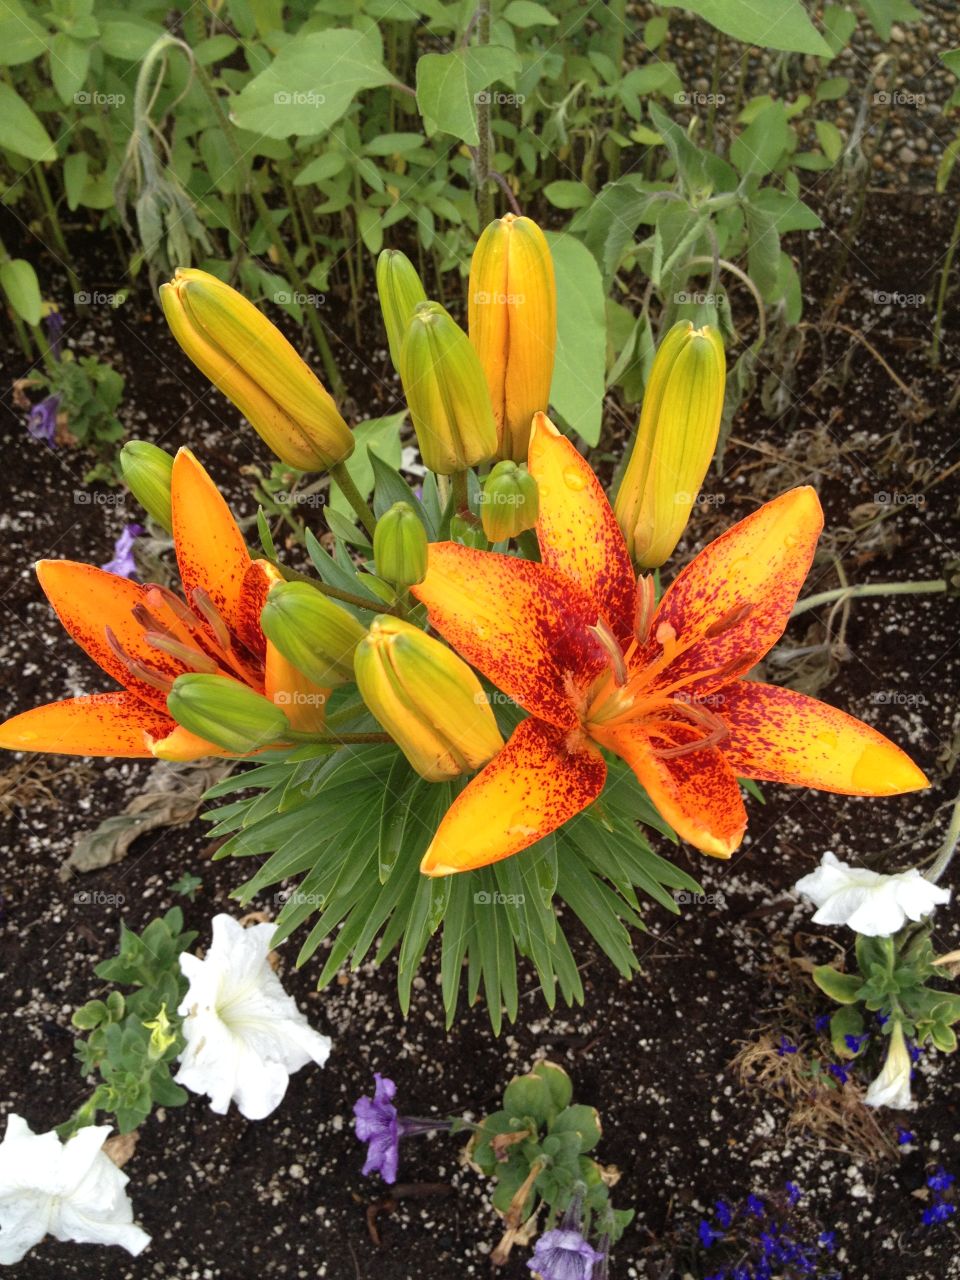 Speckled tiger lily